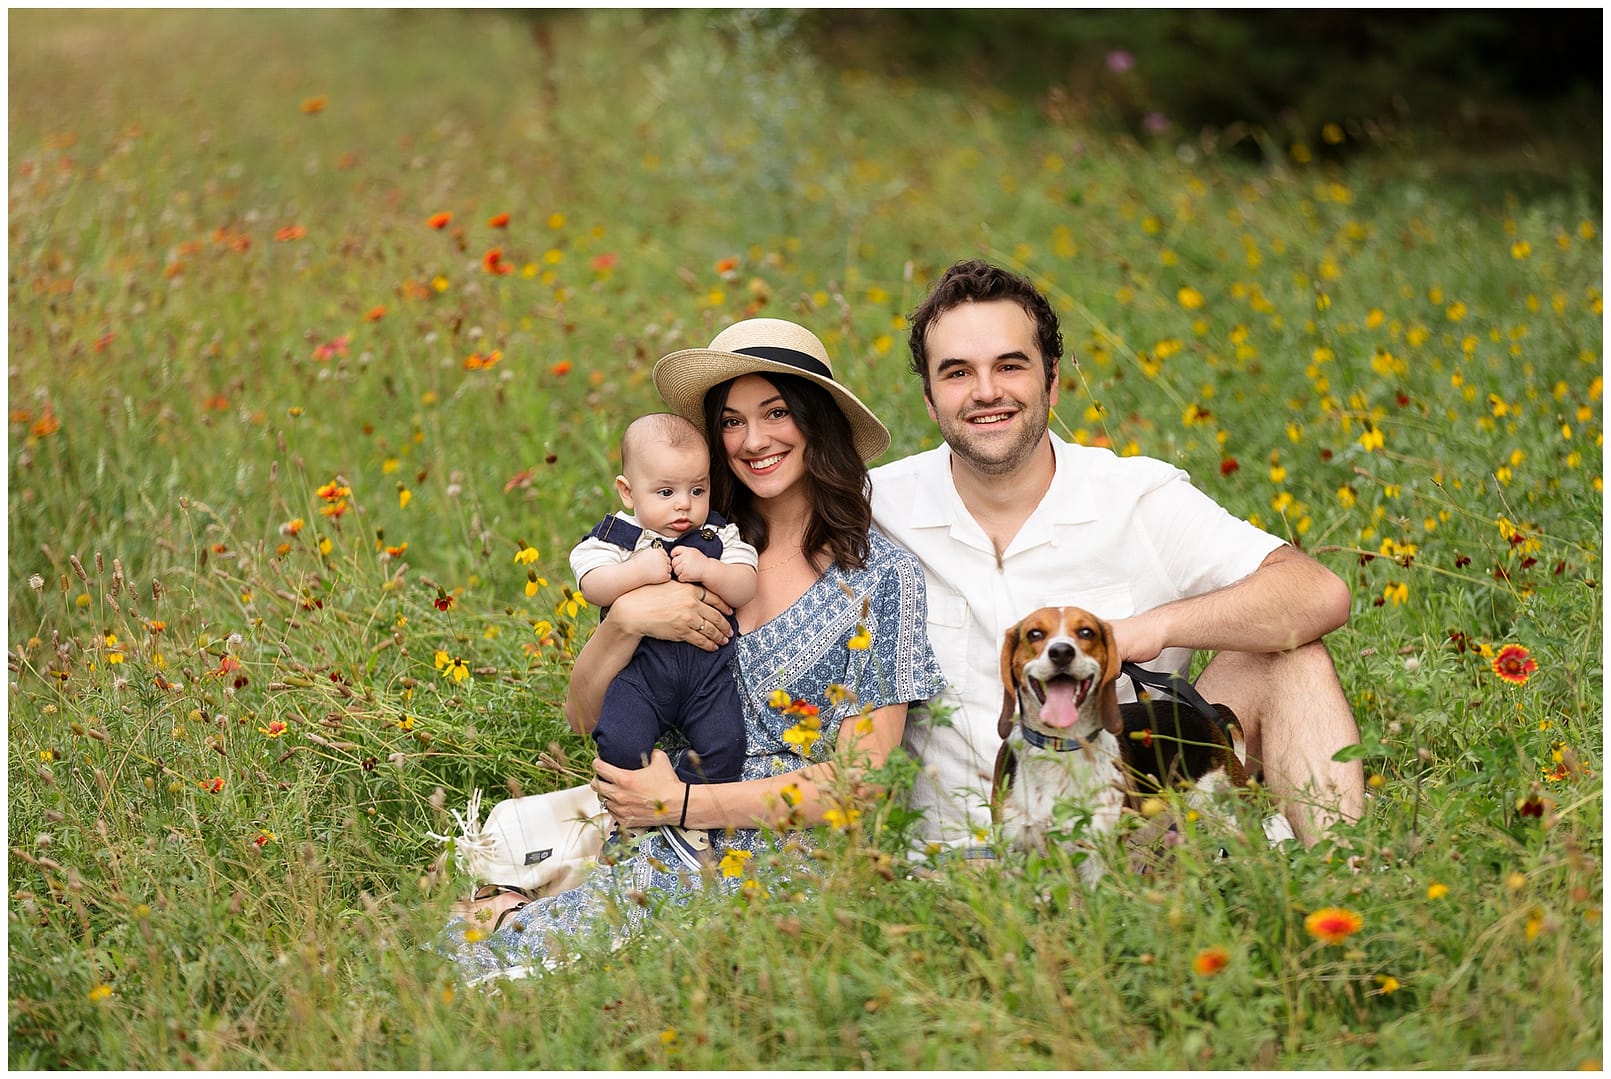 Boise family smiles among the wildflowers. Photo by Tiffany Hix Photography.